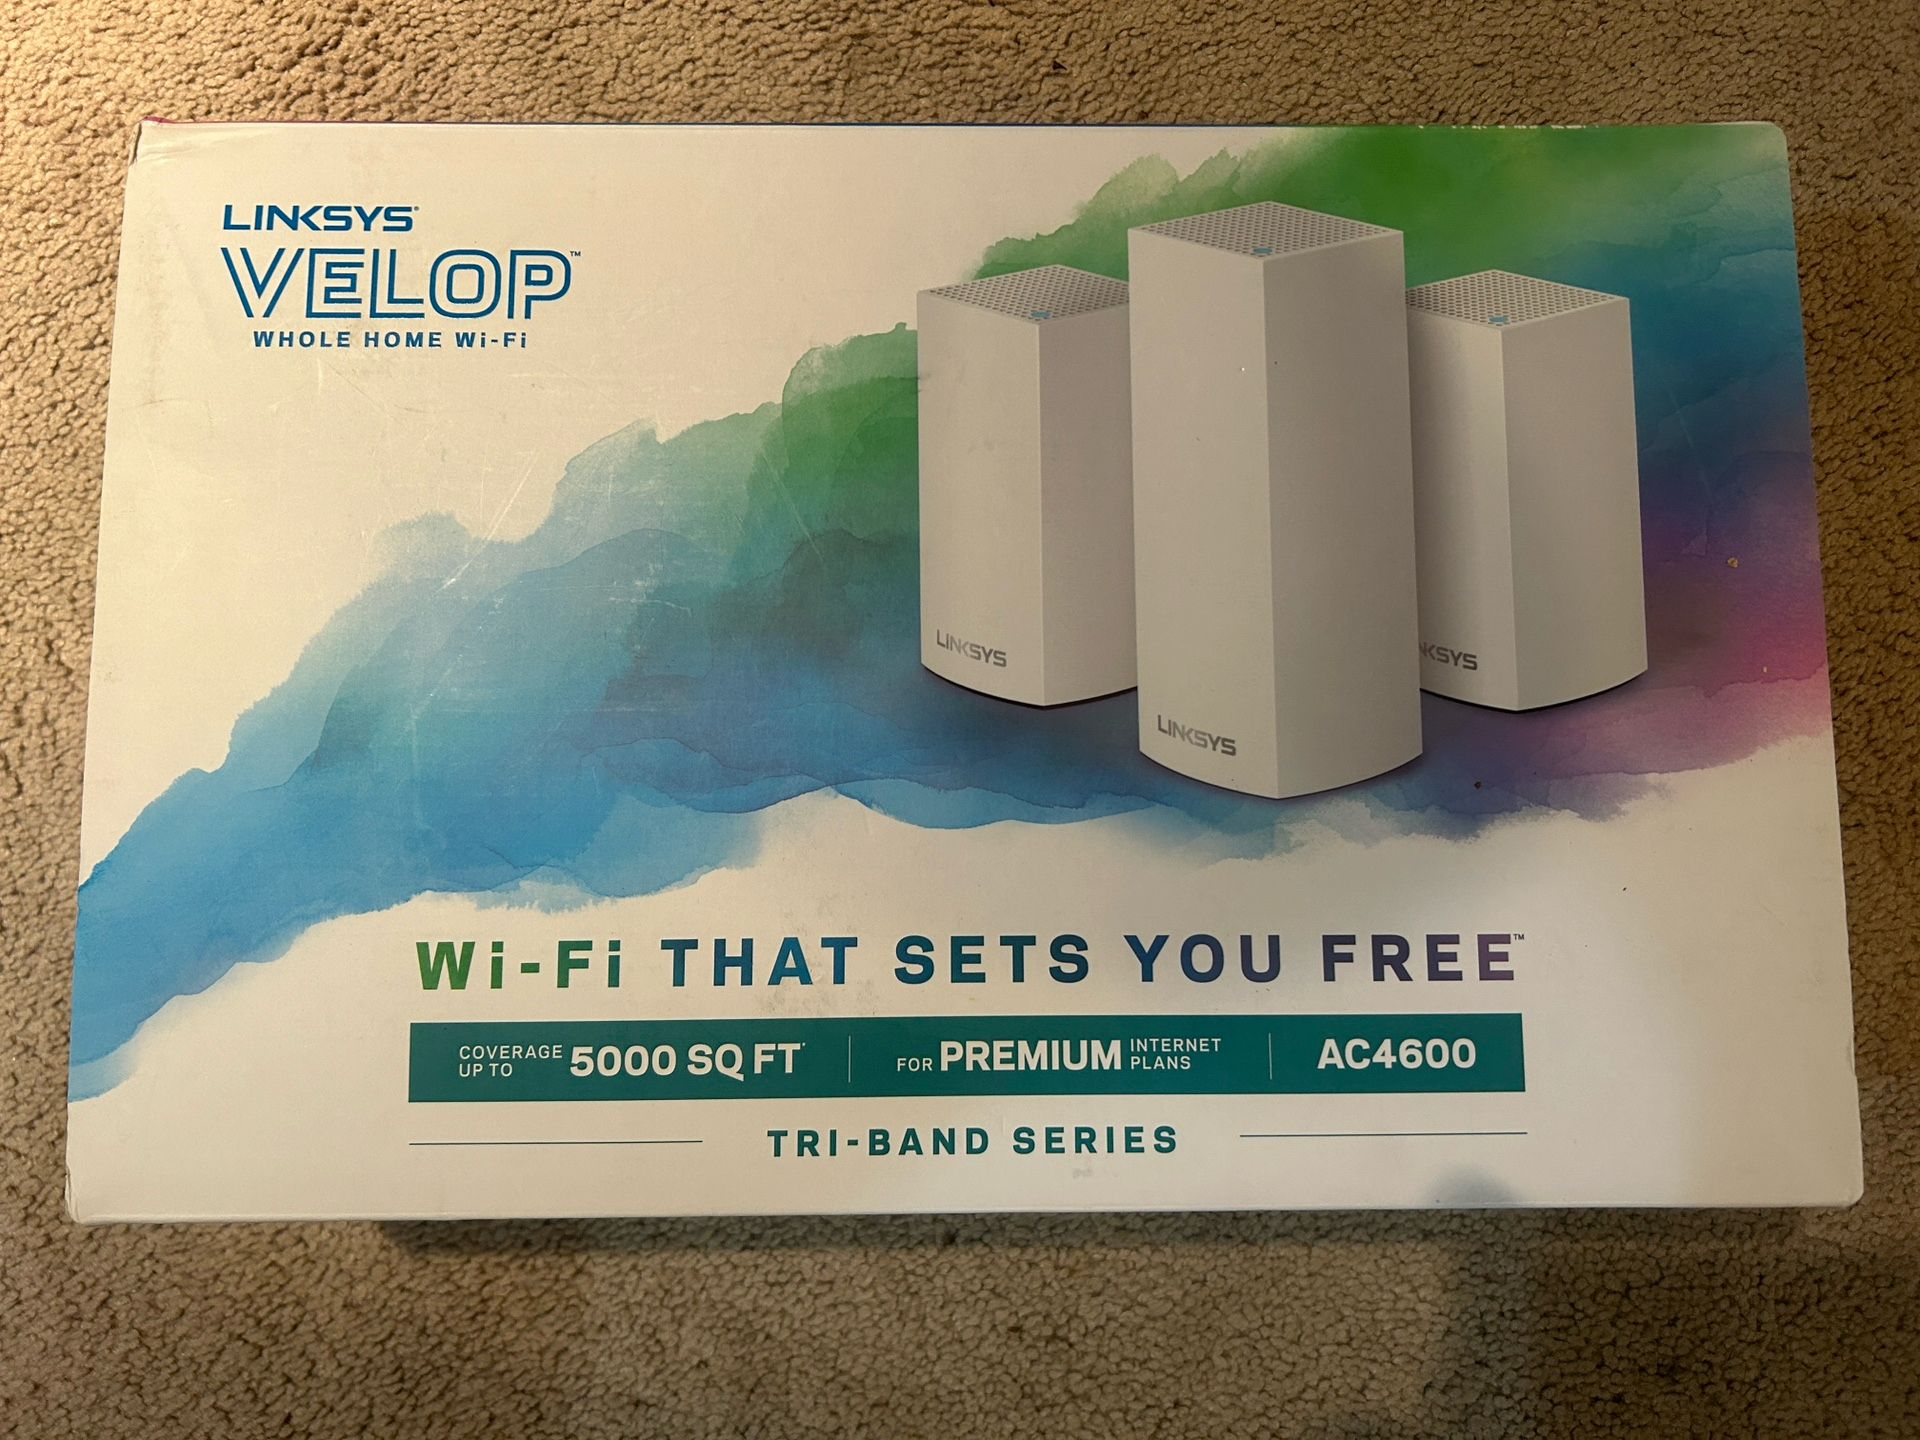 Linksys Velop AC4600 Router/Whole Home Wi-Fi